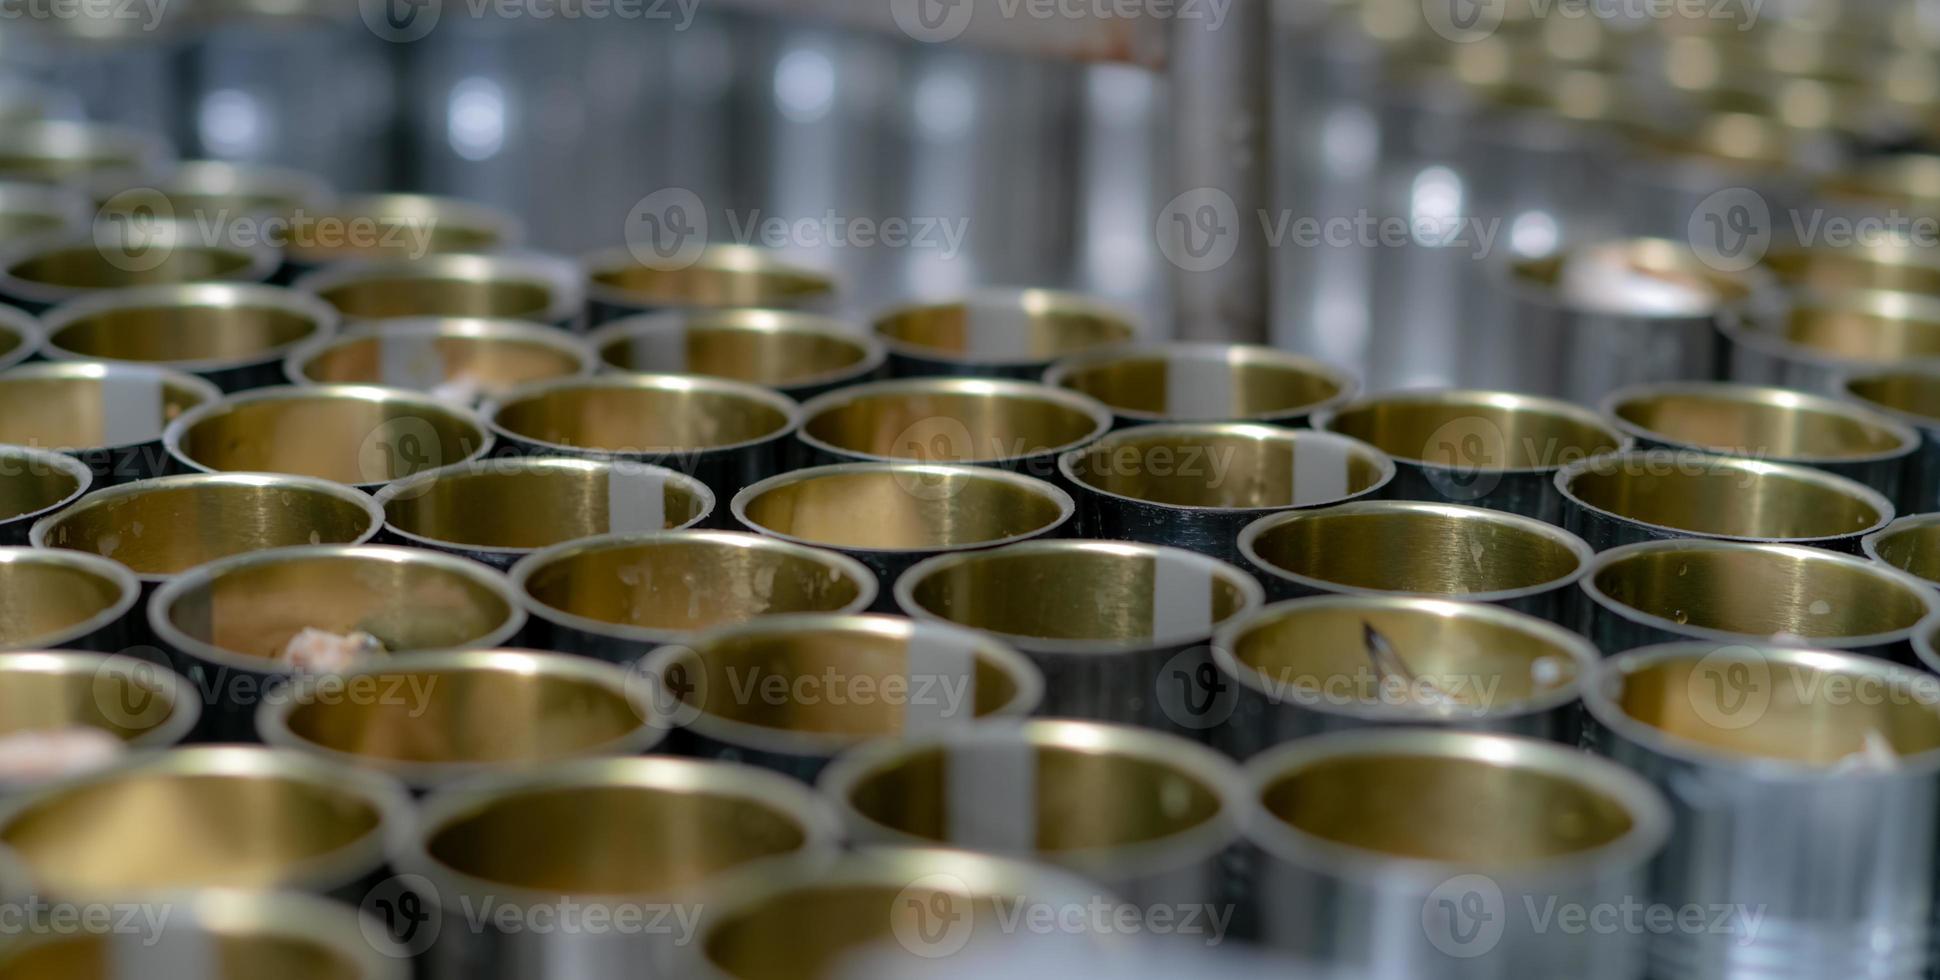 Canned fish factory. Food industry.  Many can of sardines on a conveyor belt. Sardines in red tomato sauce in tinned cans at food factory. Food processing production line. Food manufacturing industry. photo